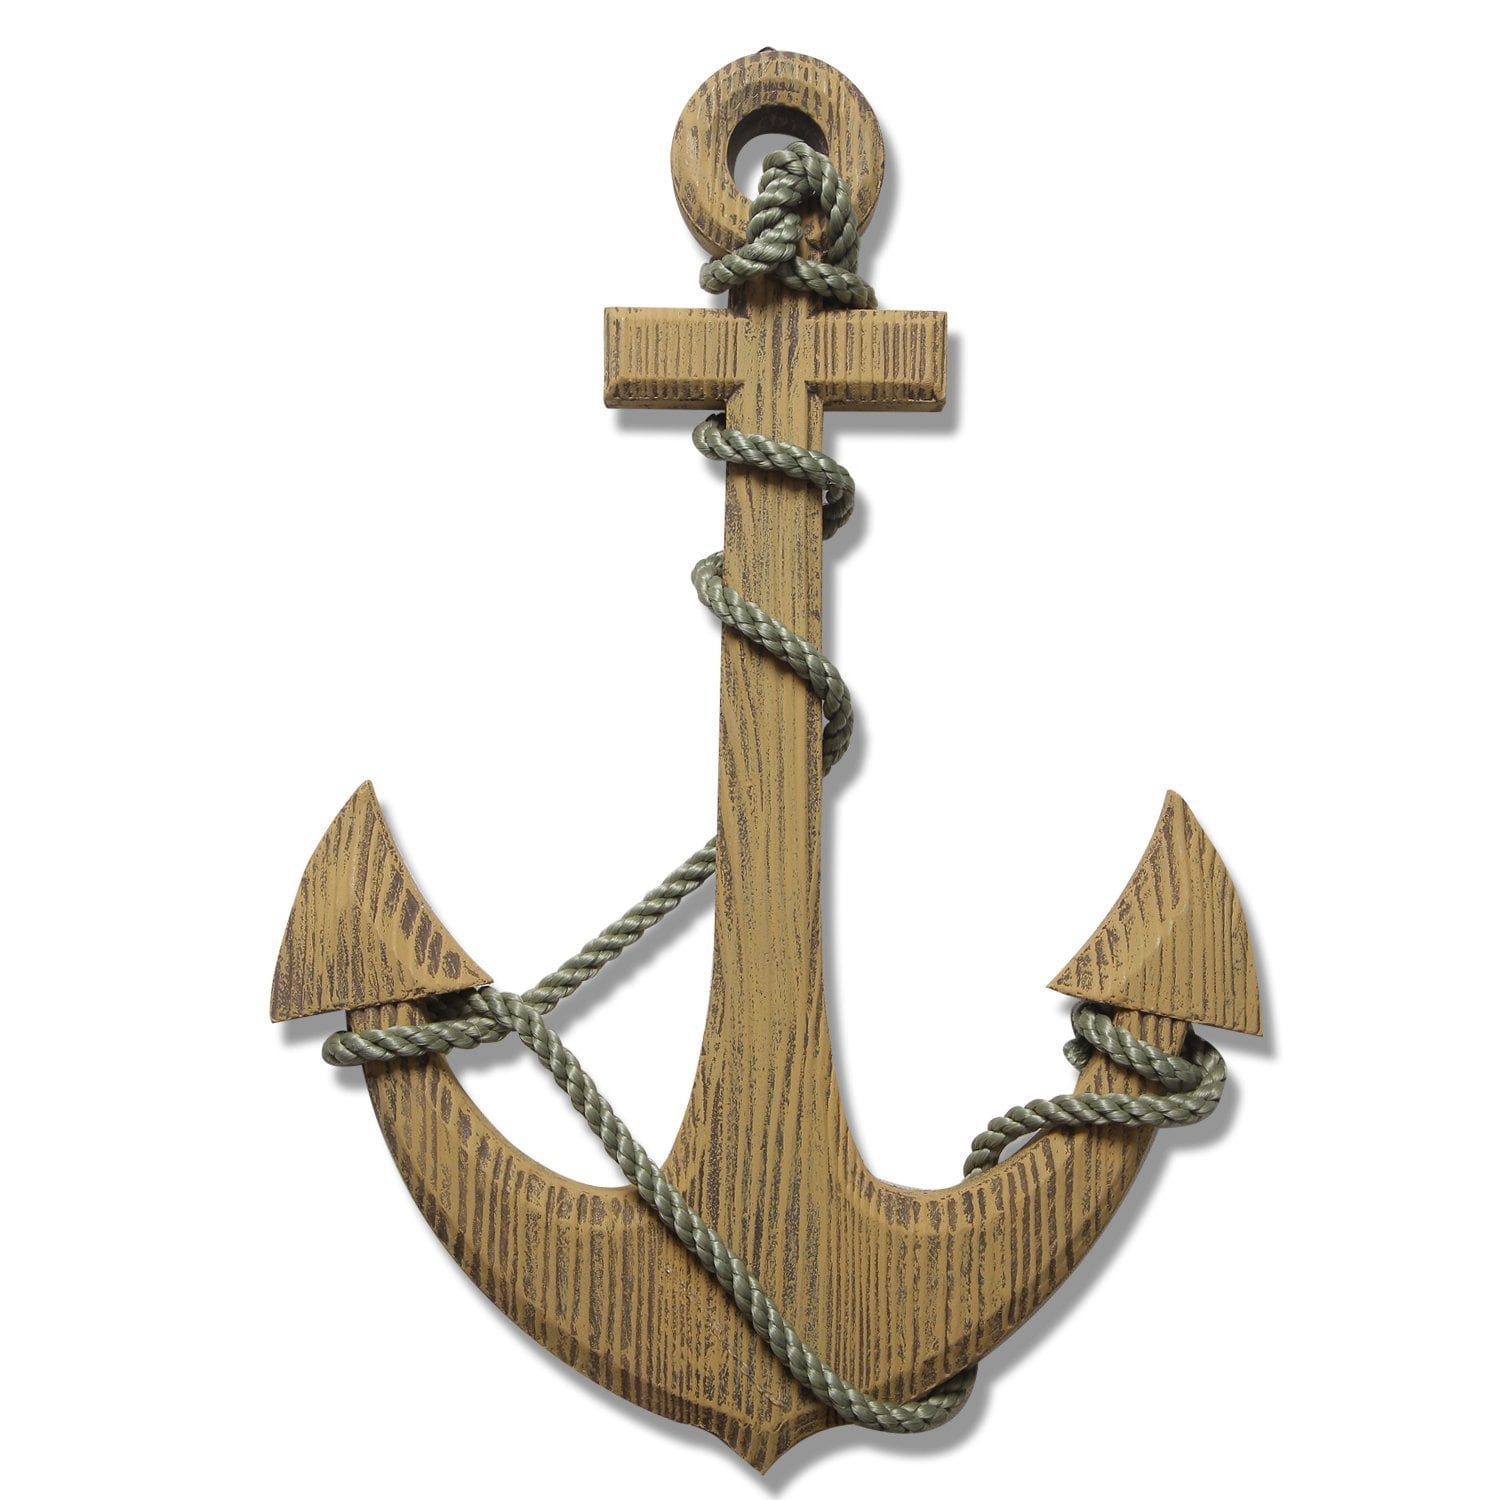 Designed to lend your home decor a nautical aesthetic, this ornamental anch...